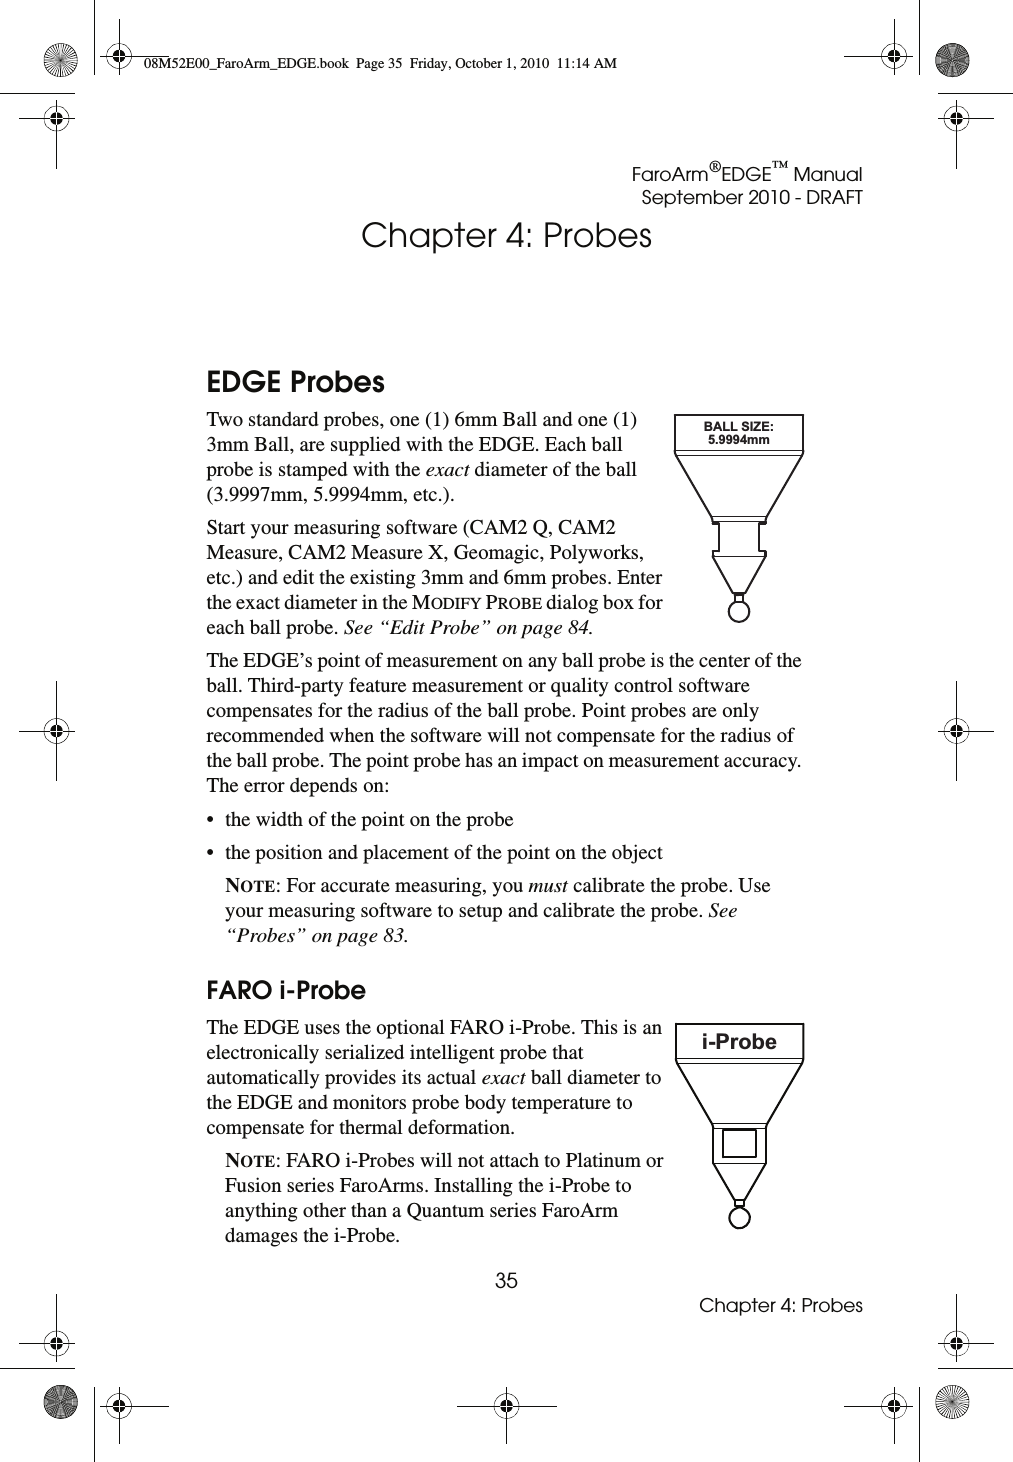 FaroArm®EDGE™ ManualSeptember 2010 - DRAFT35Chapter 4: ProbesChapter 4: ProbesEDGE ProbesTwo standard probes, one (1) 6mm Ball and one (1) 3mm Ball, are supplied with the EDGE. Each ball probe is stamped with the exact diameter of the ball (3.9997mm, 5.9994mm, etc.).Start your measuring software (CAM2 Q, CAM2 Measure, CAM2 Measure X, Geomagic, Polyworks, etc.) and edit the existing 3mm and 6mm probes. Enter the exact diameter in the MODIFY PROBE dialog box for each ball probe. See “Edit Probe” on page 84.The EDGE’s point of measurement on any ball probe is the center of the ball. Third-party feature measurement or quality control software compensates for the radius of the ball probe. Point probes are only recommended when the software will not compensate for the radius of the ball probe. The point probe has an impact on measurement accuracy. The error depends on:• the width of the point on the probe• the position and placement of the point on the objectNOTE: For accurate measuring, you must calibrate the probe. Use your measuring software to setup and calibrate the probe. See “Probes” on page 83.FARO i-ProbeThe EDGE uses the optional FARO i-Probe. This is an electronically serialized intelligent probe that automatically provides its actual exact ball diameter to the EDGE and monitors probe body temperature to compensate for thermal deformation. NOTE: FARO i-Probes will not attach to Platinum or Fusion series FaroArms. Installing the i-Probe to anything other than a Quantum series FaroArm damages the i-Probe.BALL SIZE:5.9994mmi-Probe08M52E00_FaroArm_EDGE.book  Page 35  Friday, October 1, 2010  11:14 AM